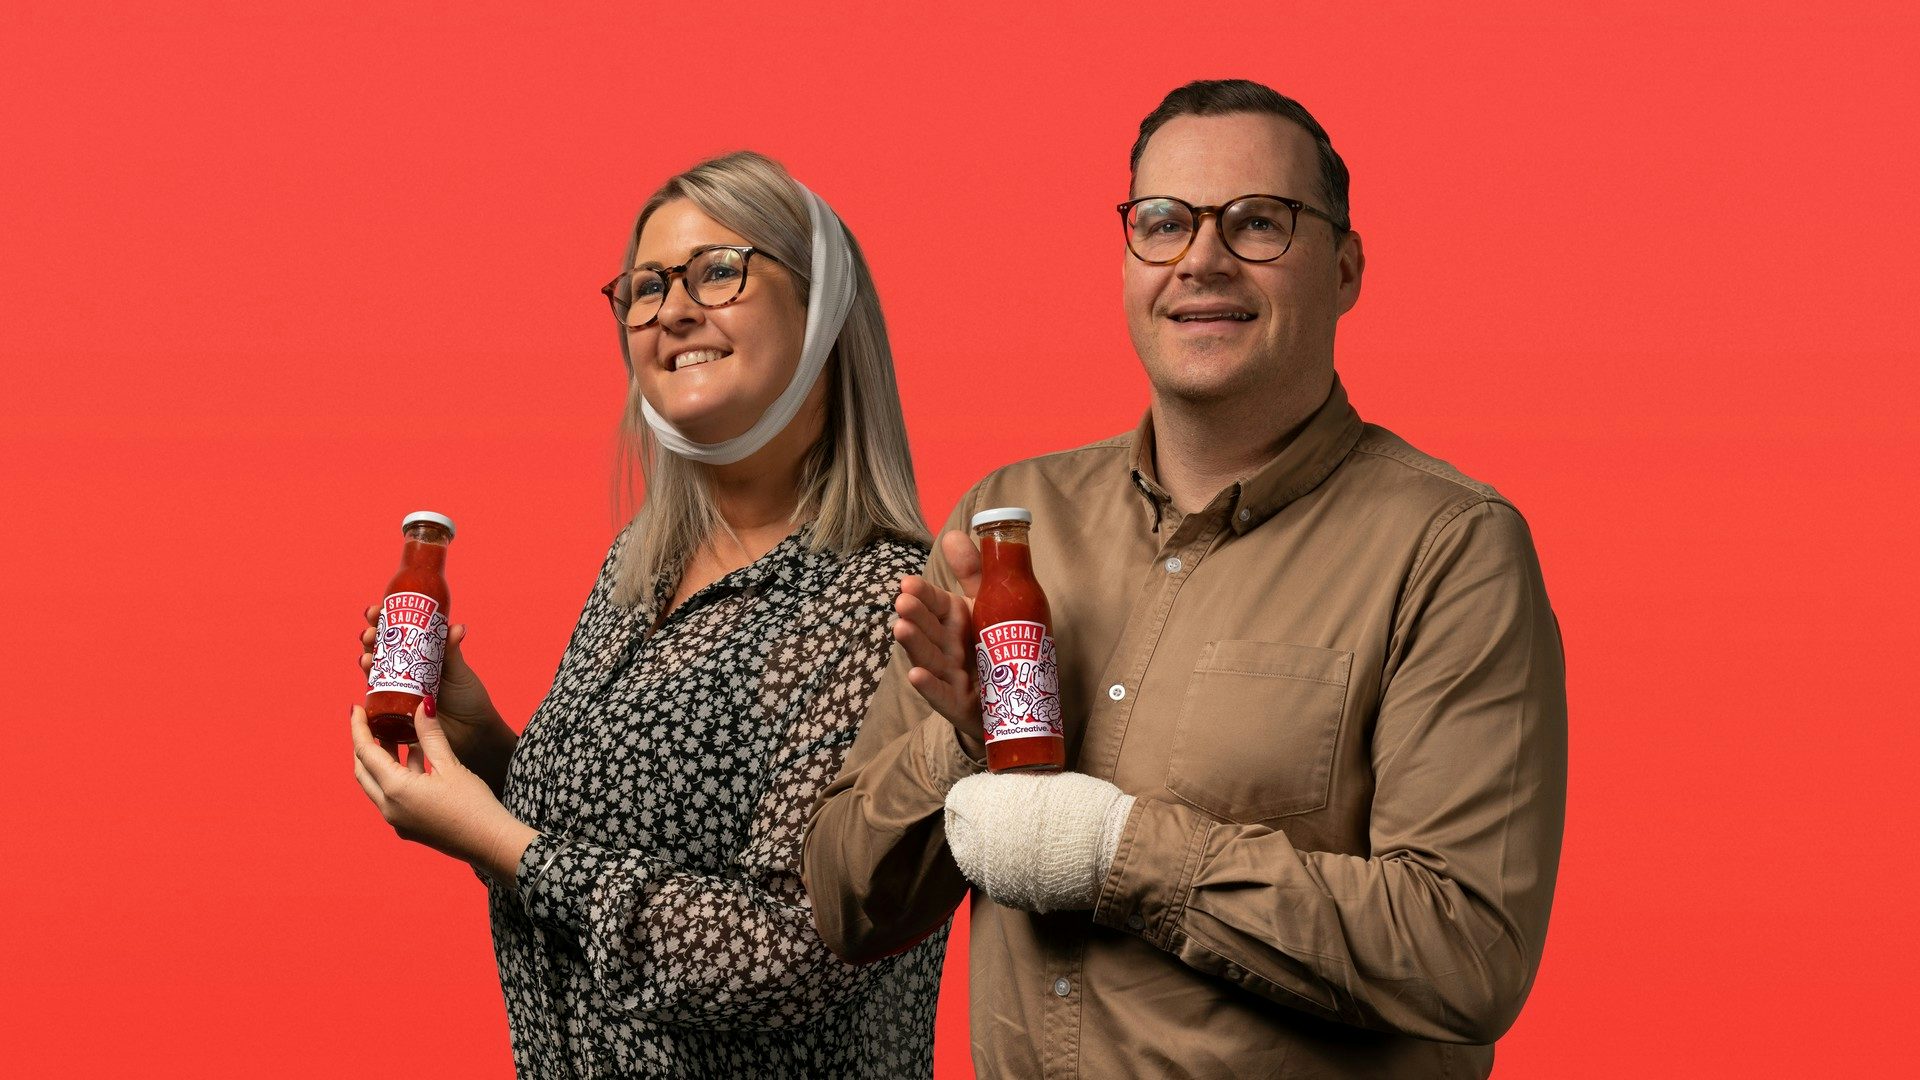 People from Plato showcasing the Special Sauce bottles